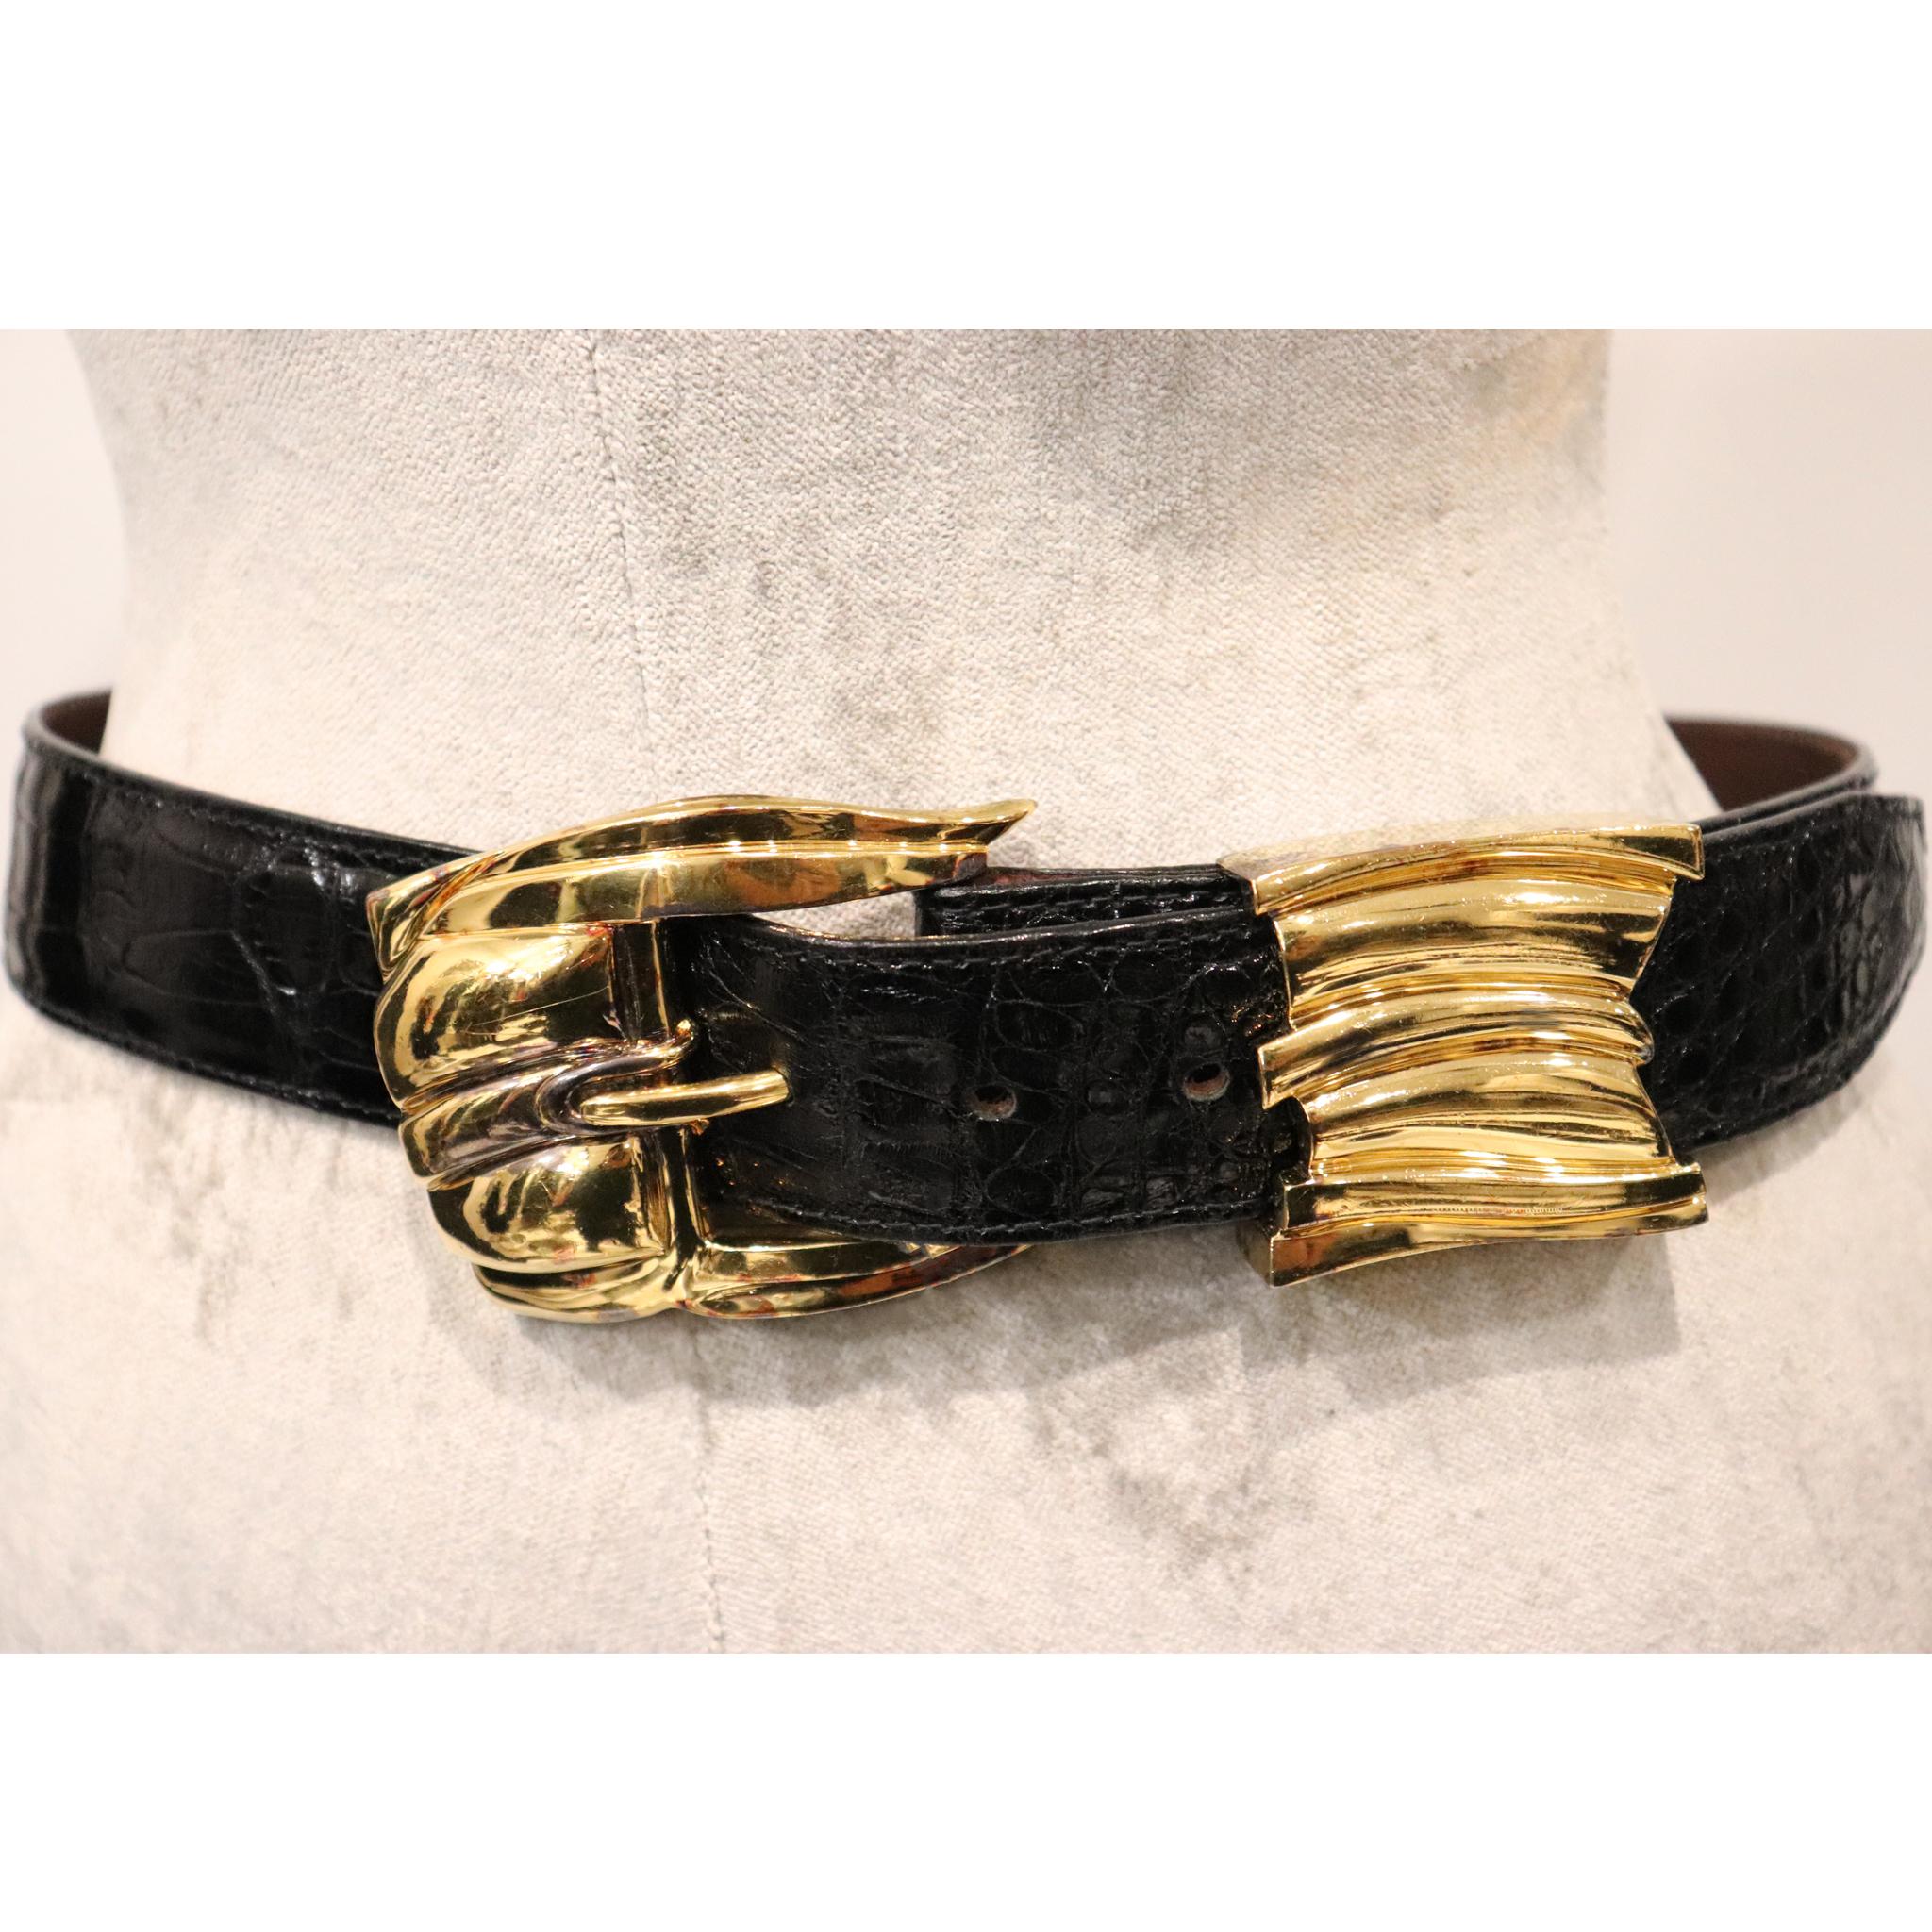 Barry Kieselstein-Cord Black Belt W/ Gold Buckle. Vintage belt from 1990s in excellent condition 

Measurements: 

Longest length - 32.1 inches 
Smallest length - 28.2 inches
Height - 1.5 inches 